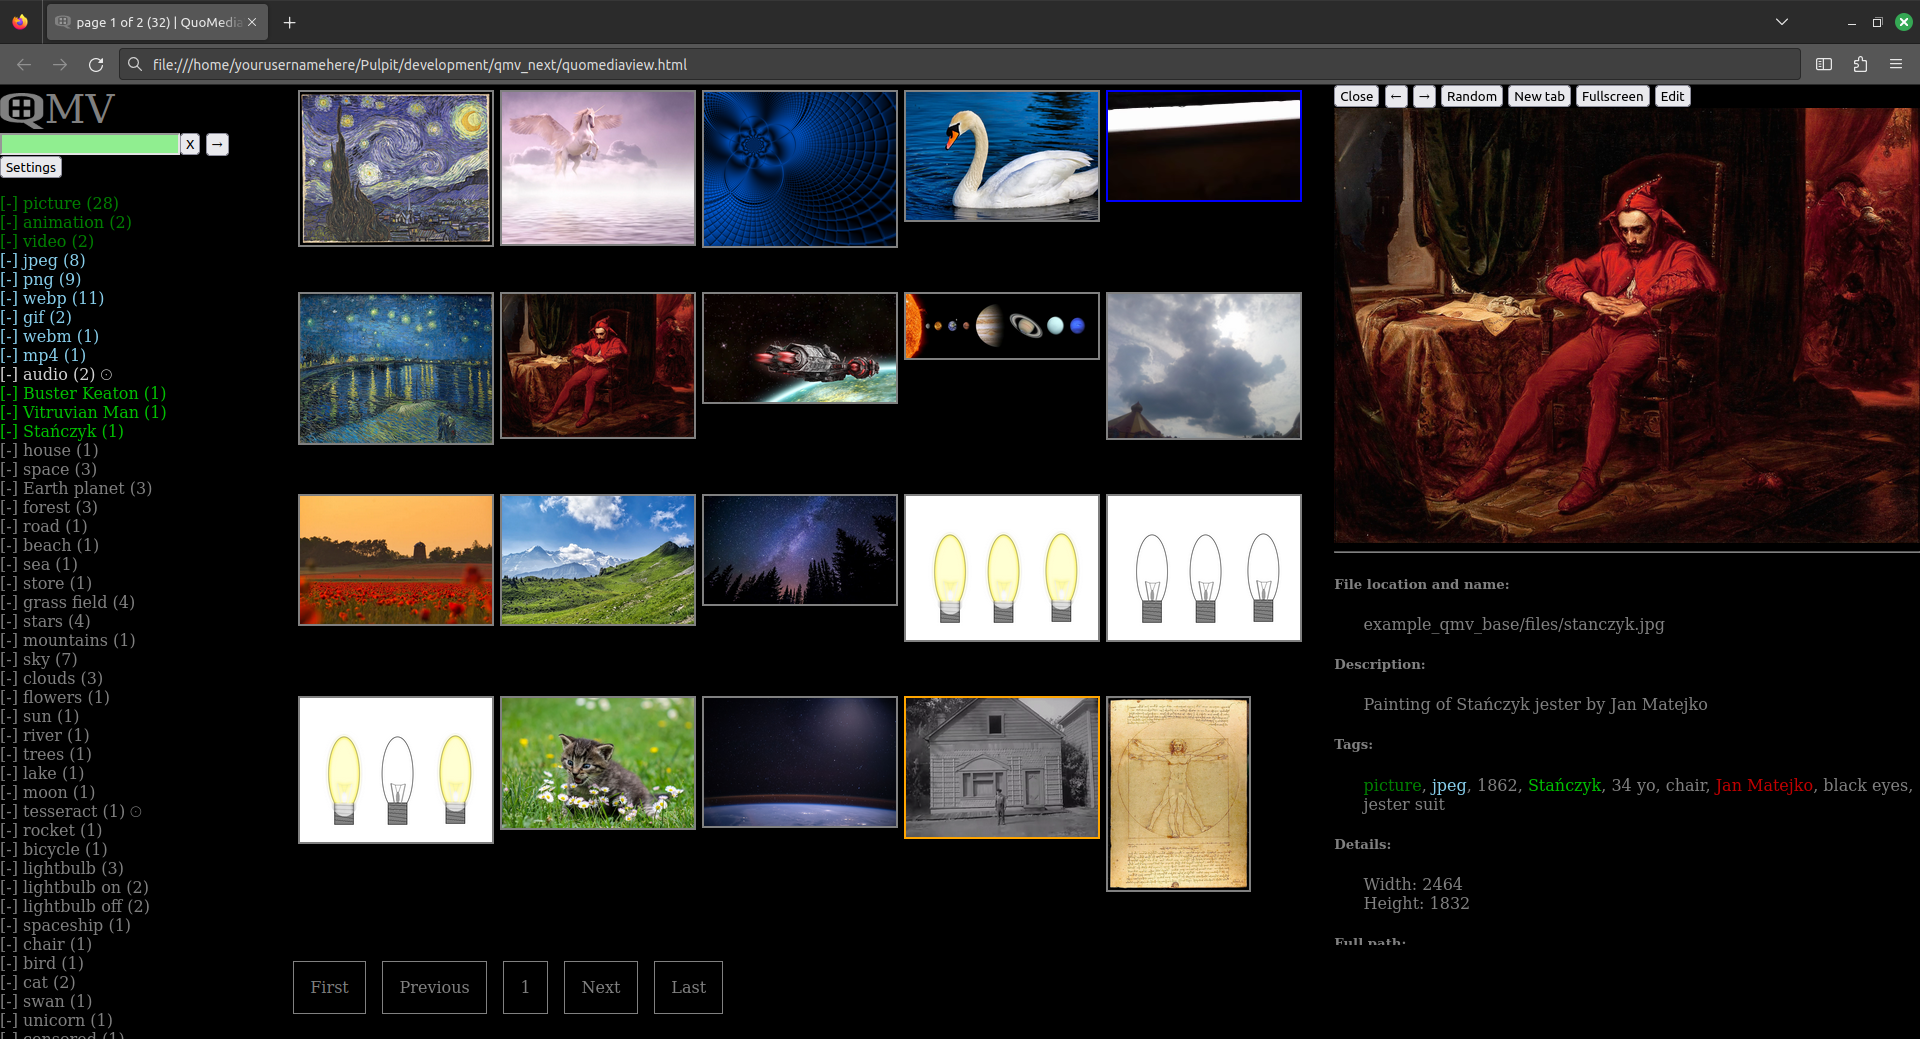 Starting/Main site view with grid thumbnails